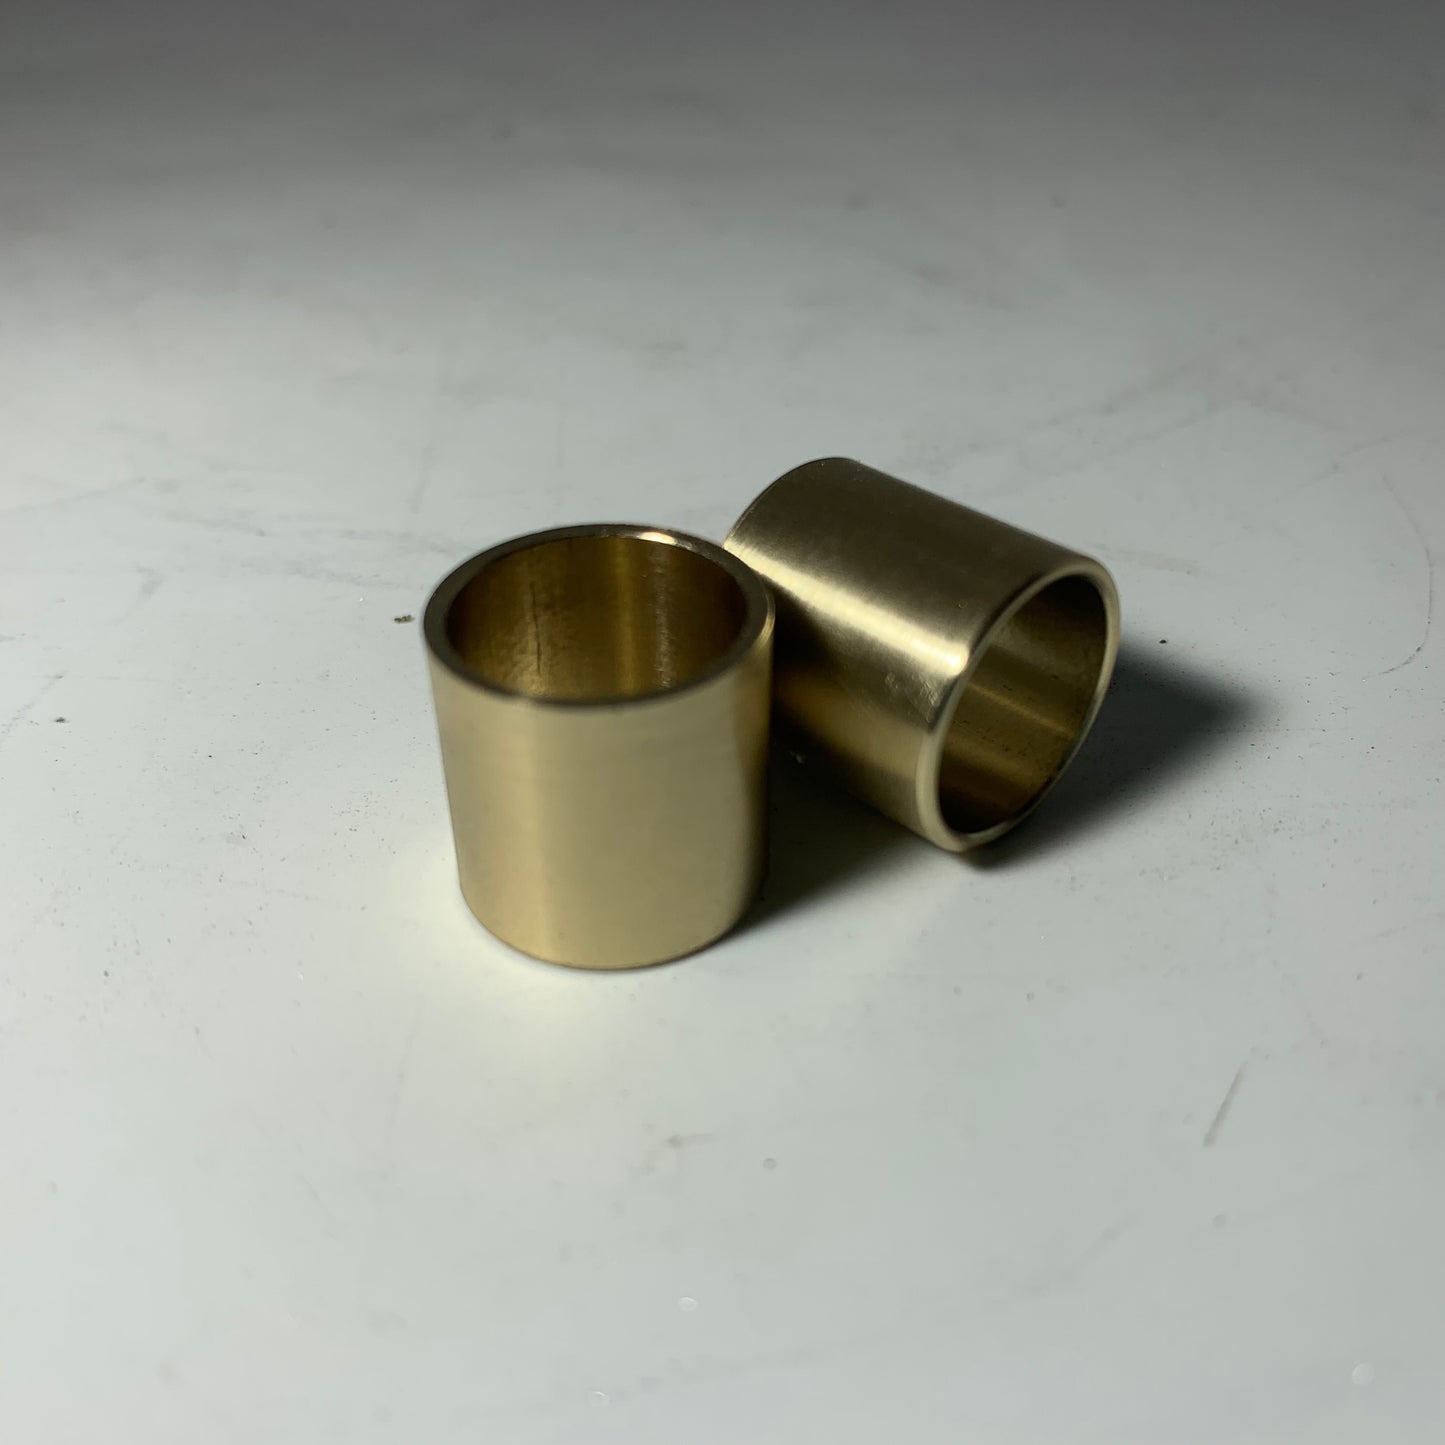 Bushing 12mm to 13mm adapter